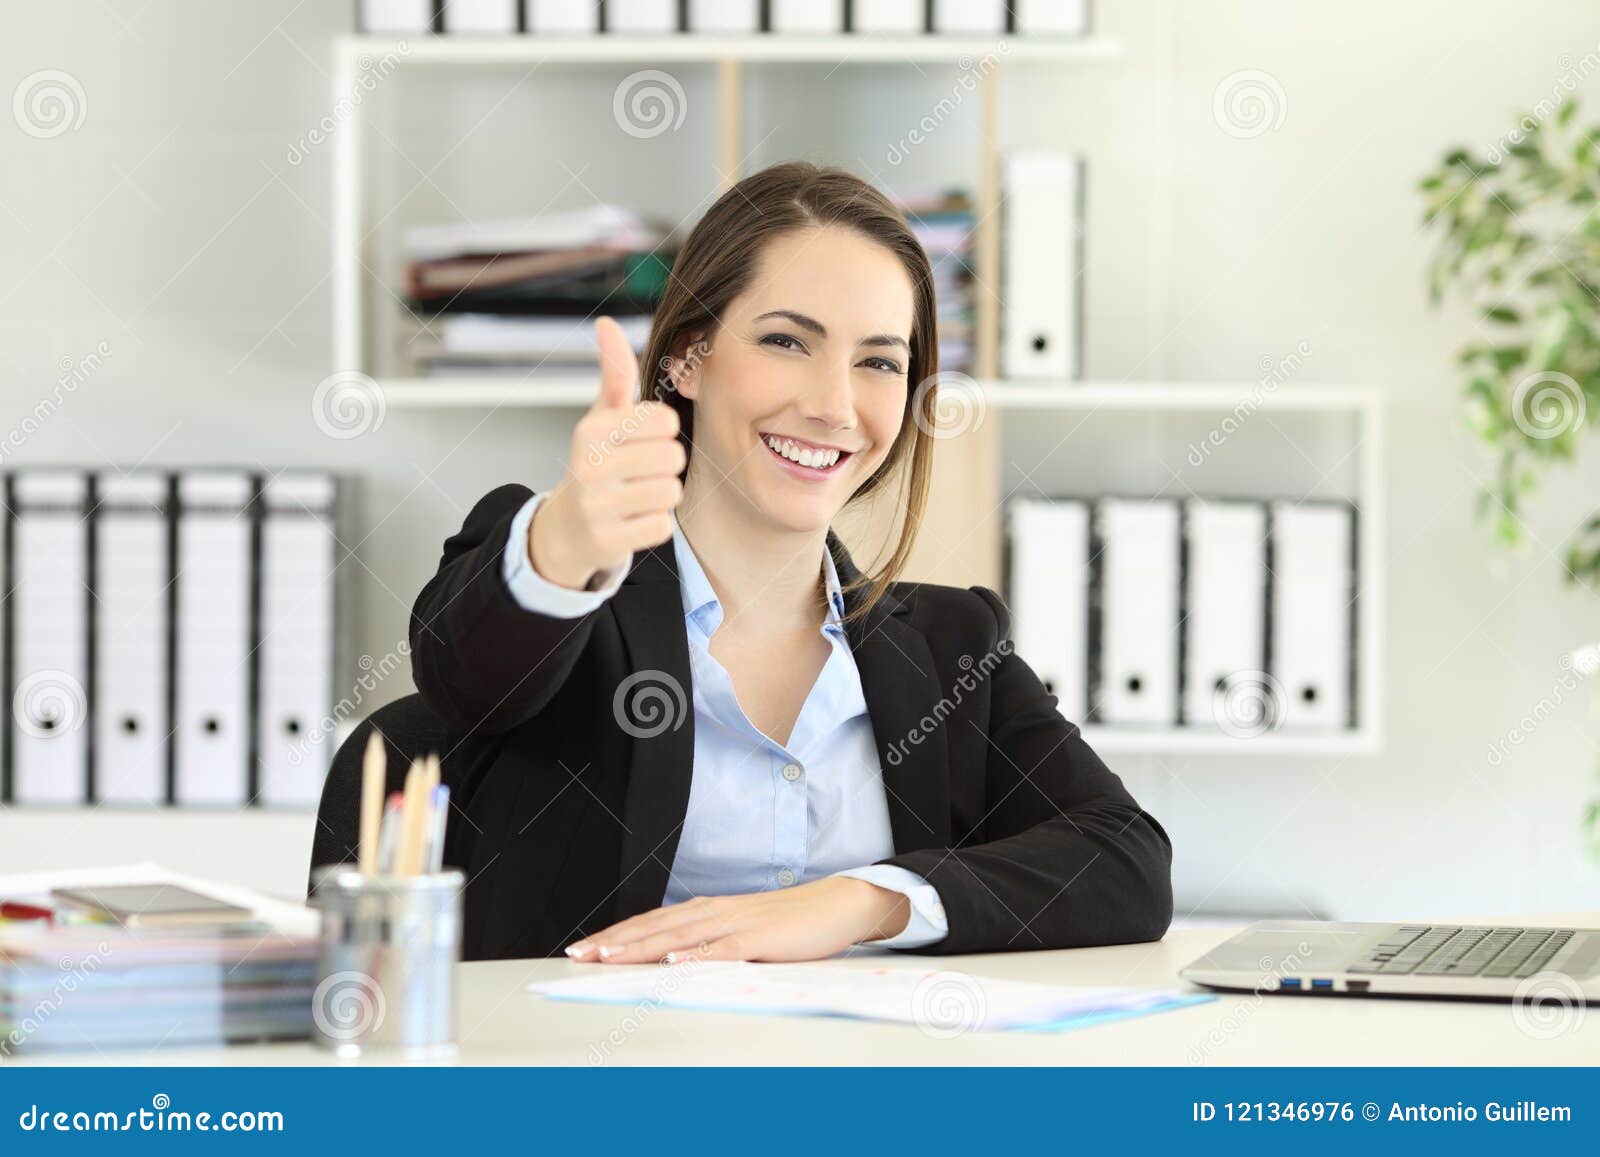 proud office worker posing with thumbs up